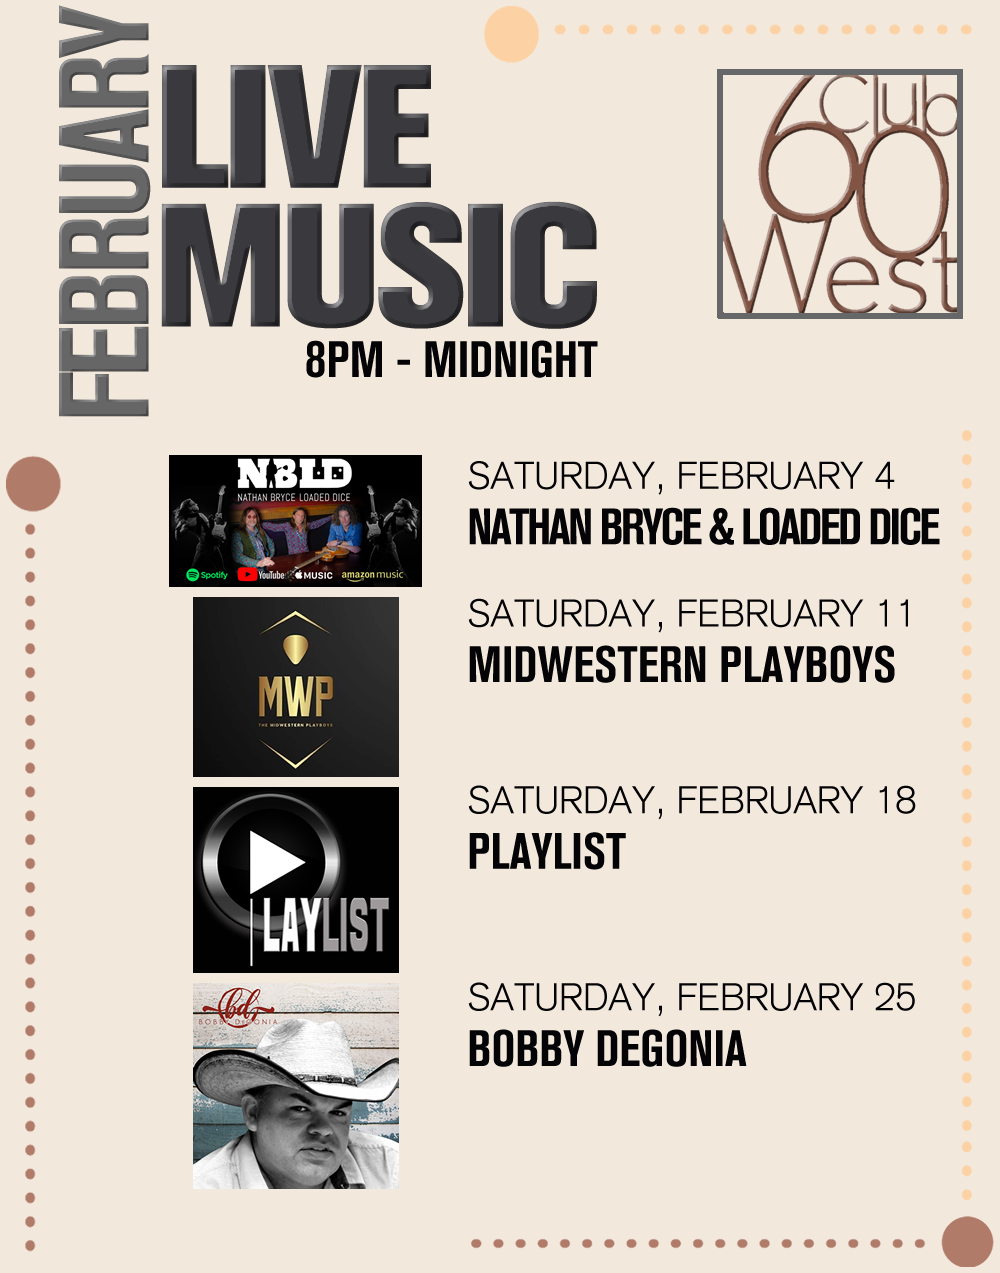 Club 60 West Live Entertainment- February 2023